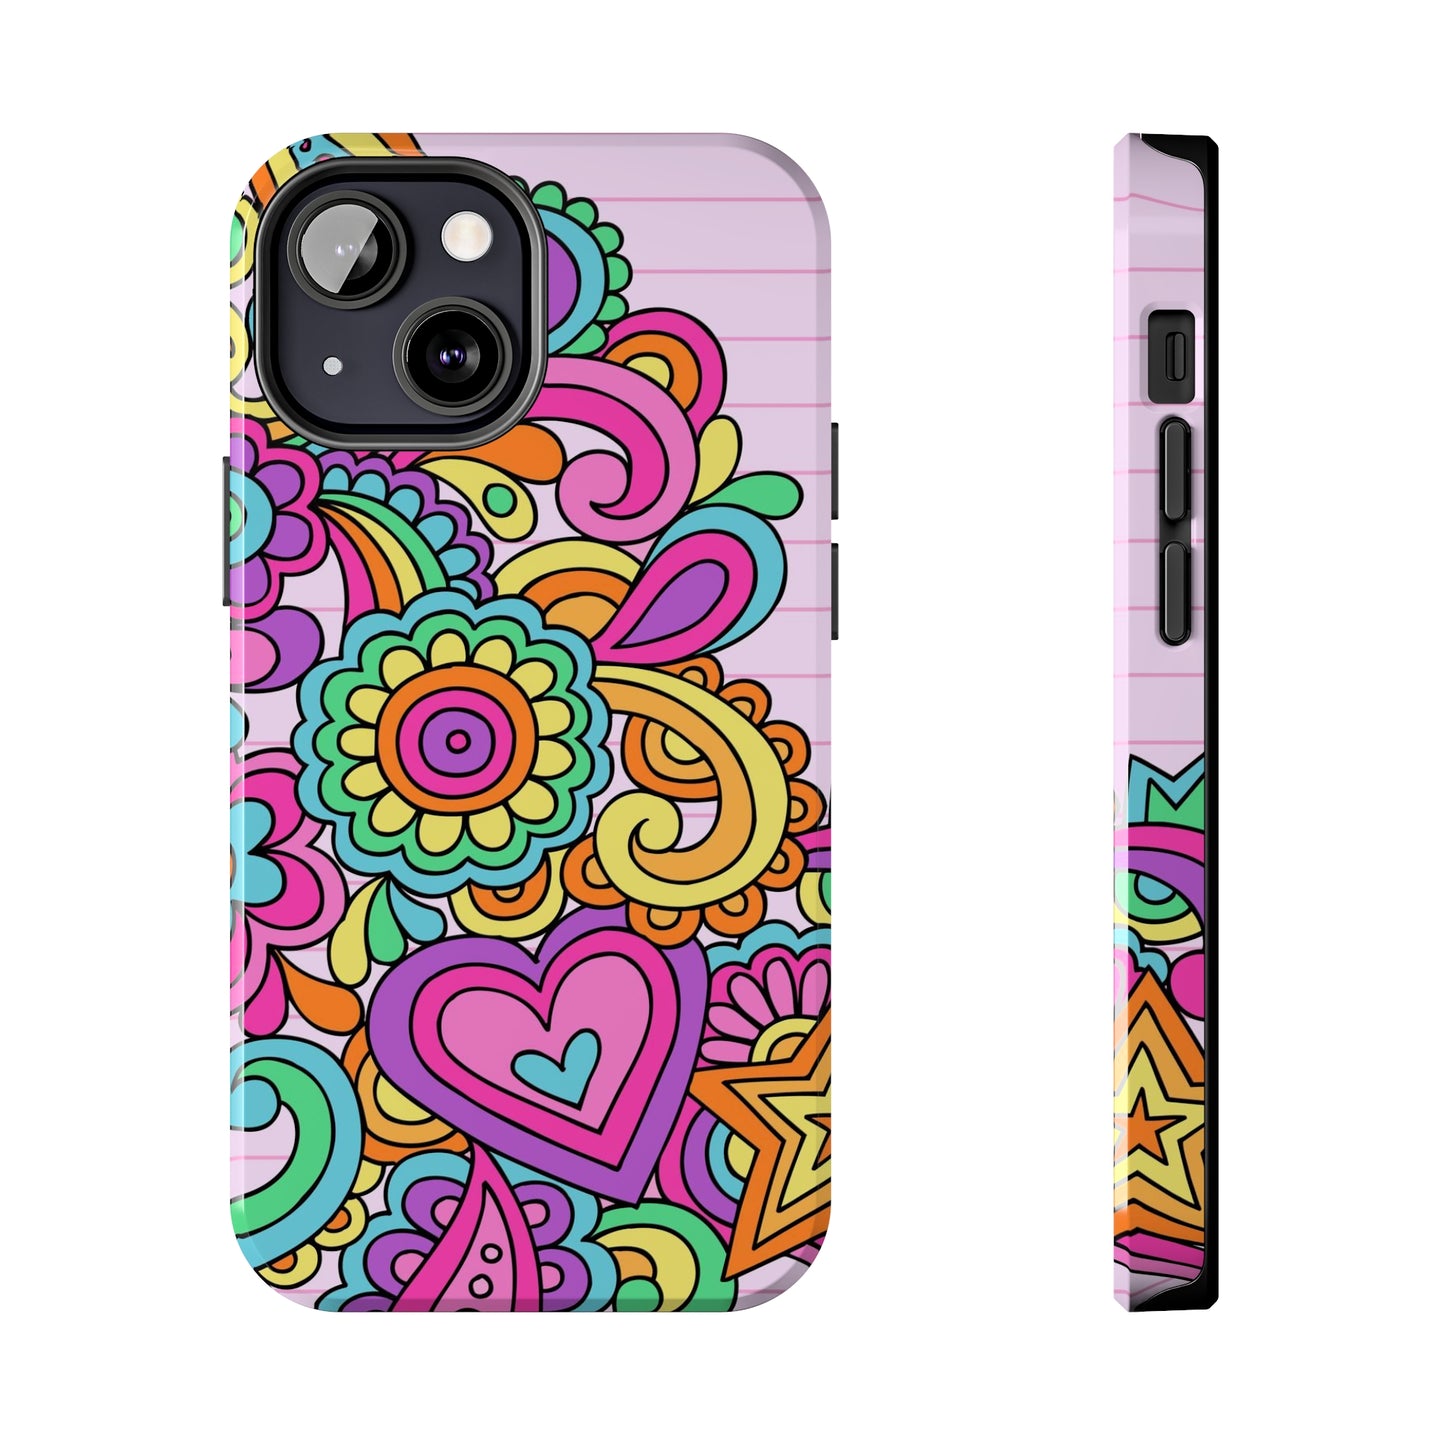 Flower Child Only / iPhone Case